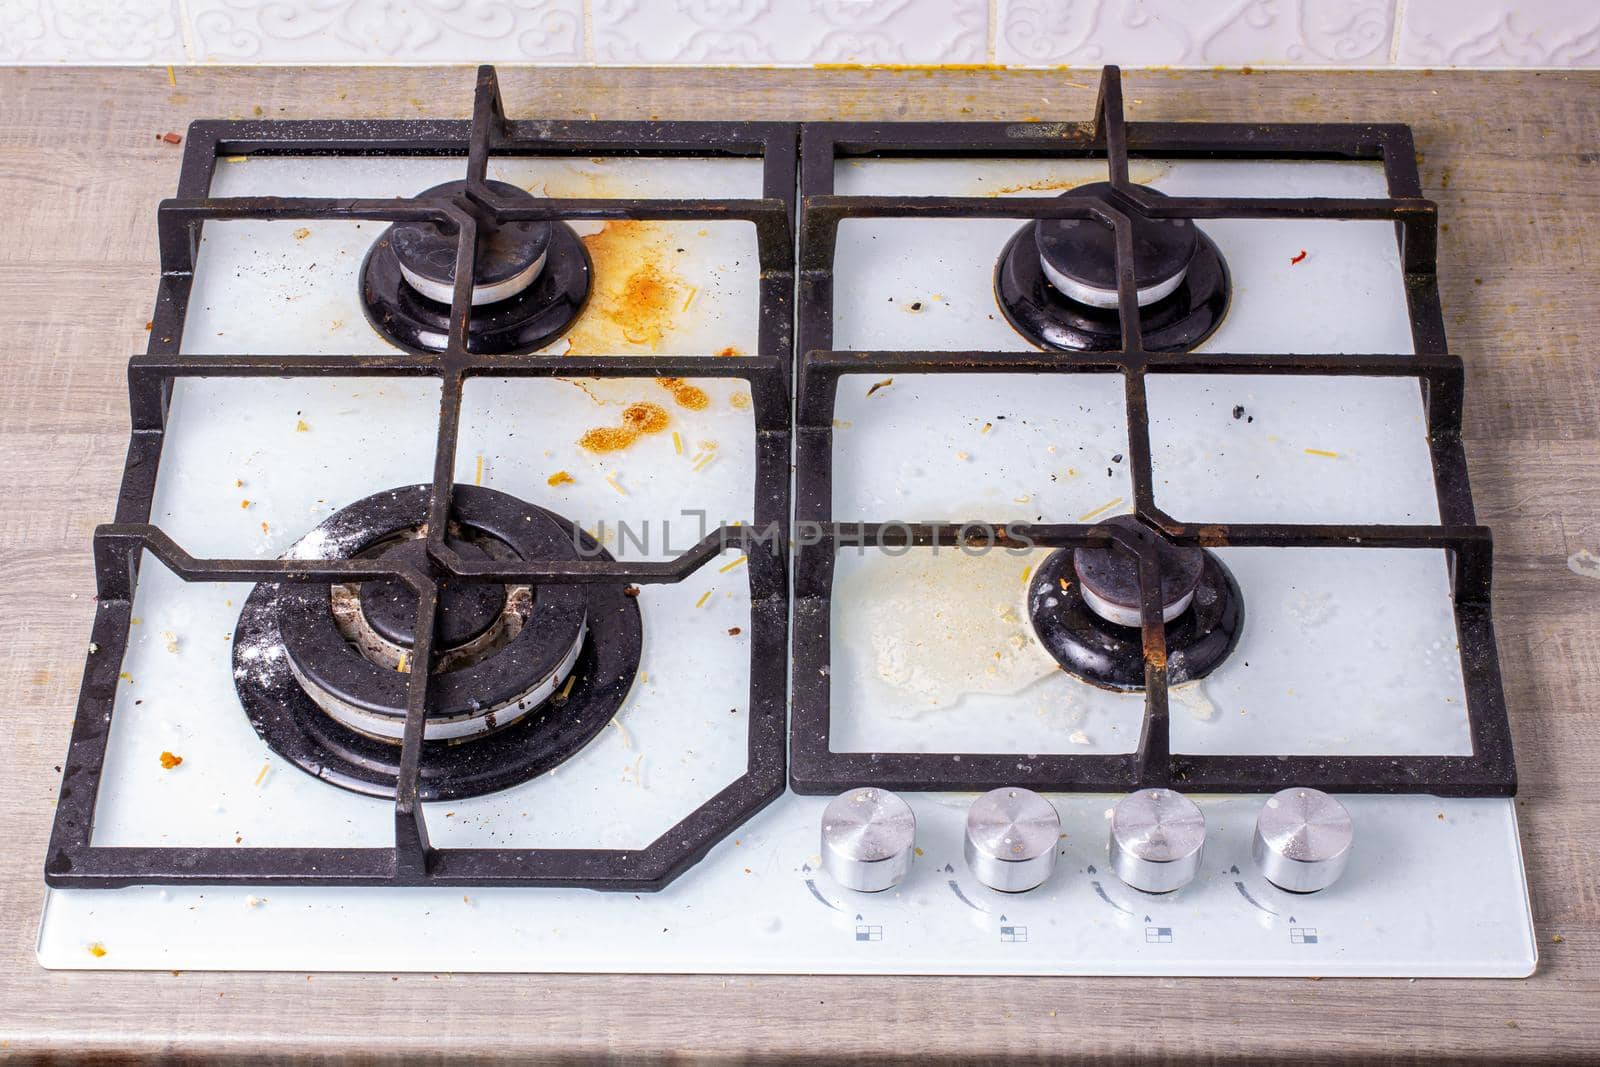 Dirty gas hob, soiled in cooking, stove in grease. Unsanitary conditions, disorder in the house.